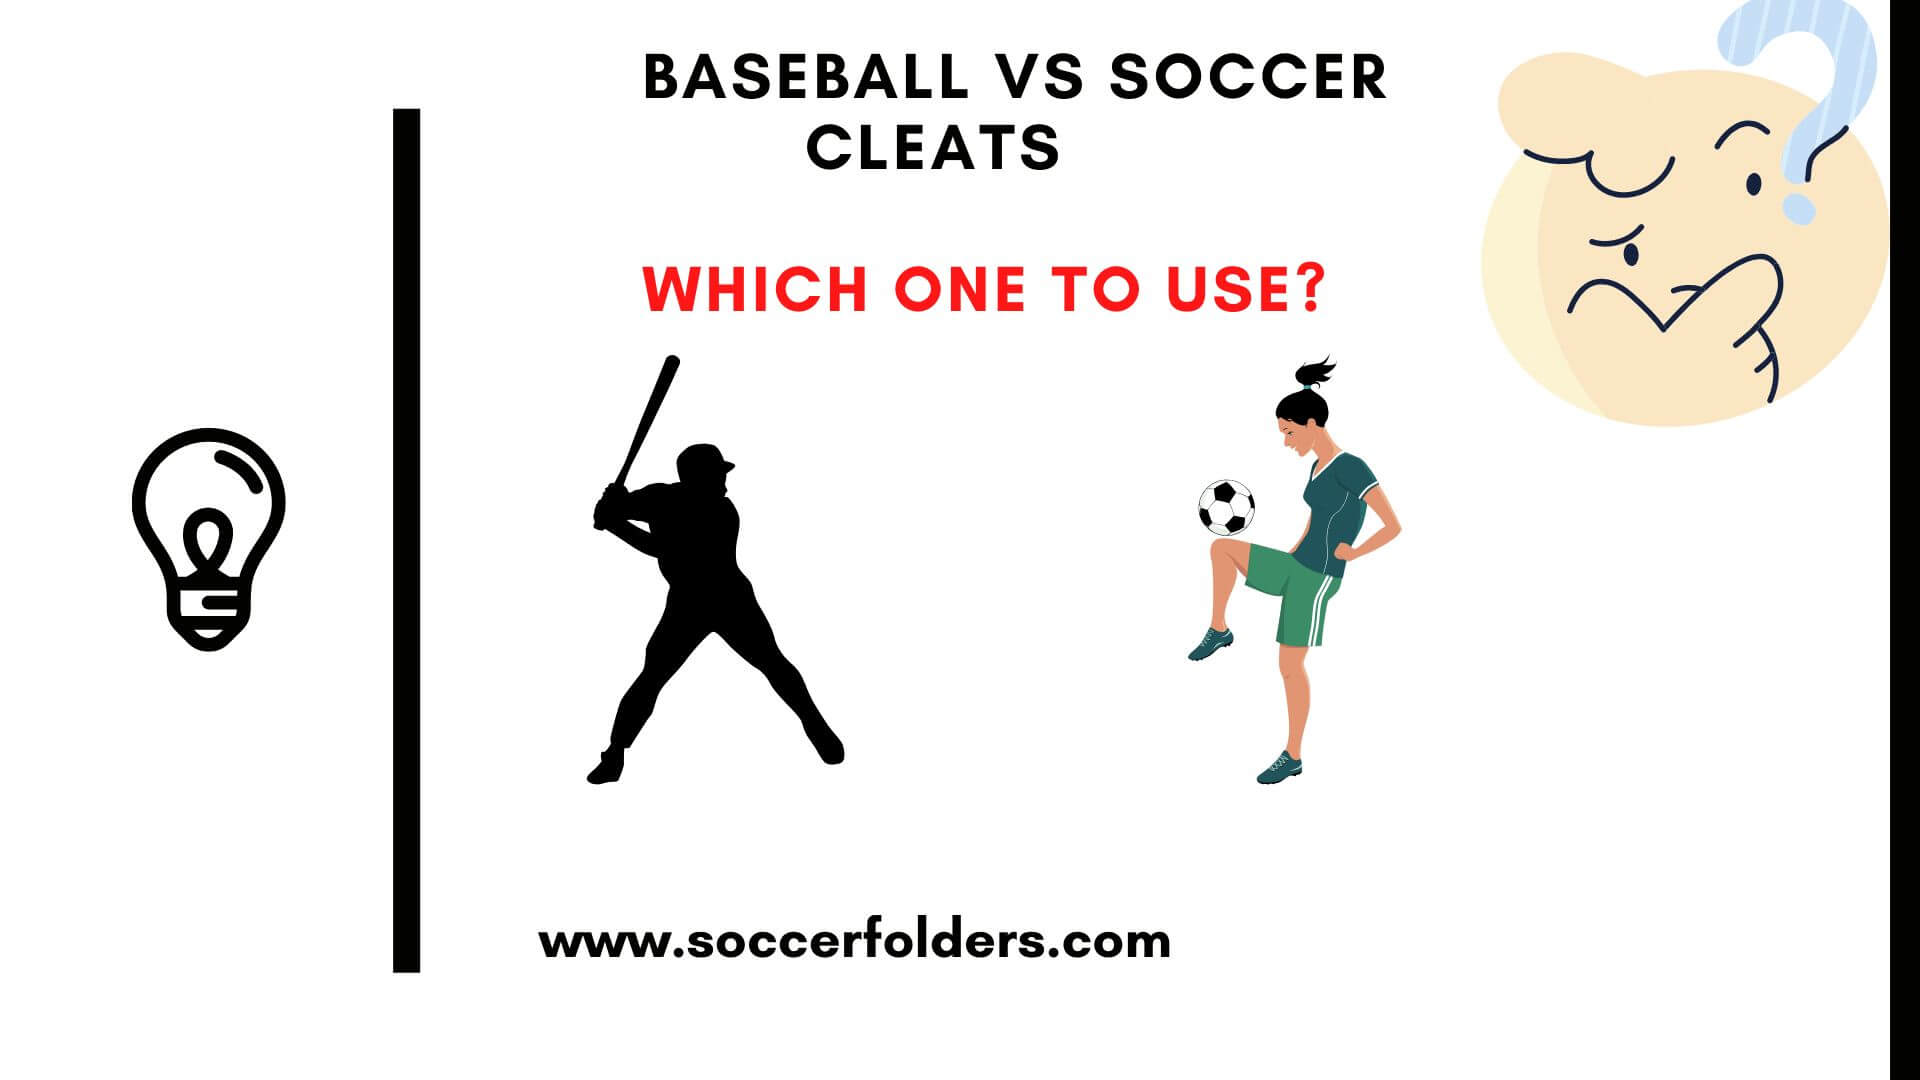 Baseball cleats vs Soccer cleats - Featured Image